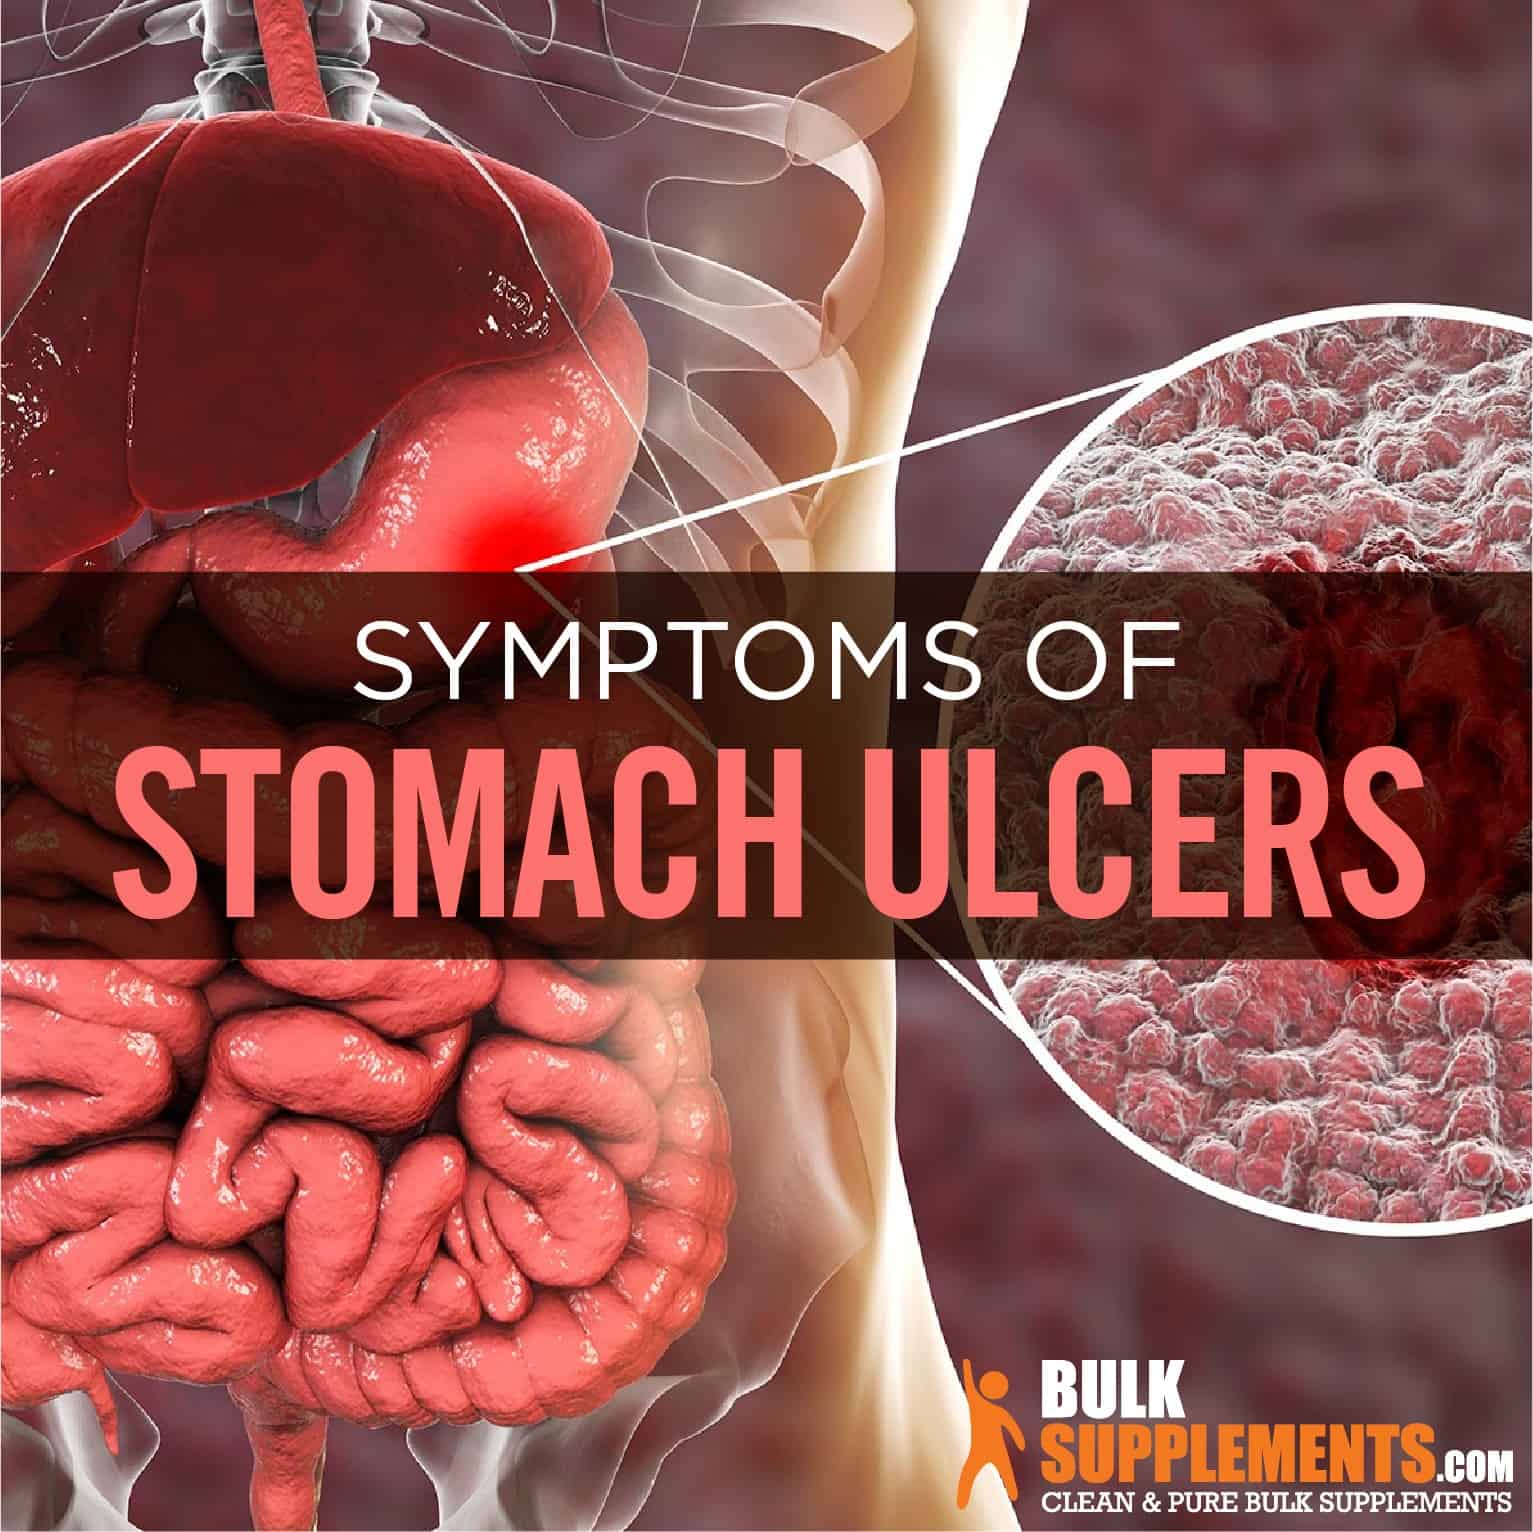 Stomach Ulcers: Causes, Symptoms & Treatment by James Denlinger